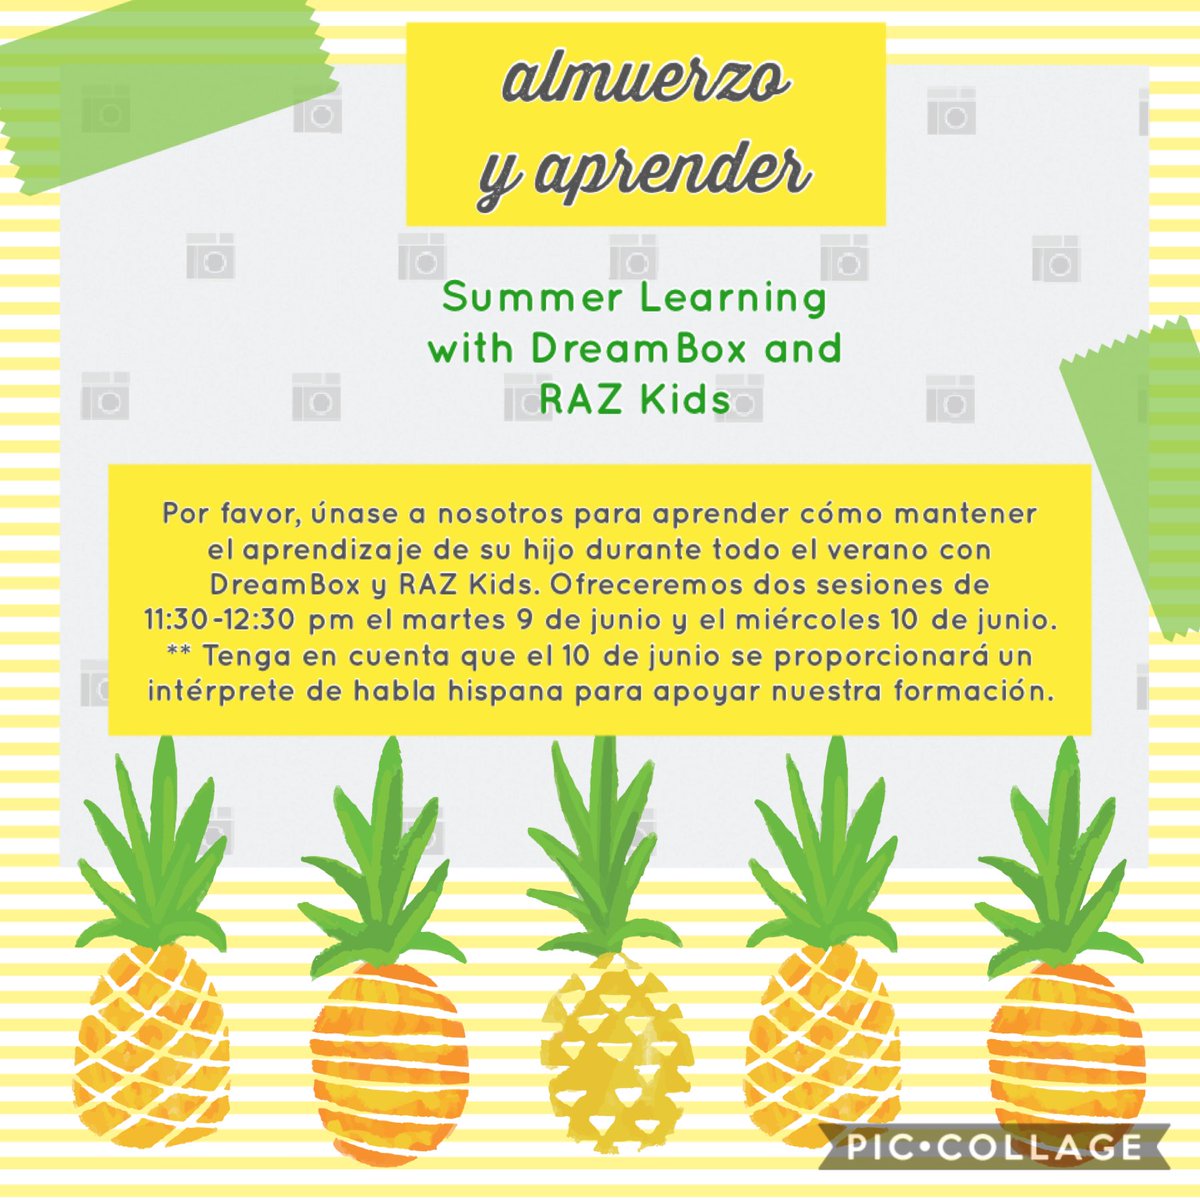 Let’s keep the learning going through the ☀️ SUMMER☀️!! YMES Families we are here to support you with “how” to support your child with DreamBox and RAZ Kids. Join us next week for a Lunch and Learn. Please rsvp here: docs.google.com/forms/d/1I36mo…